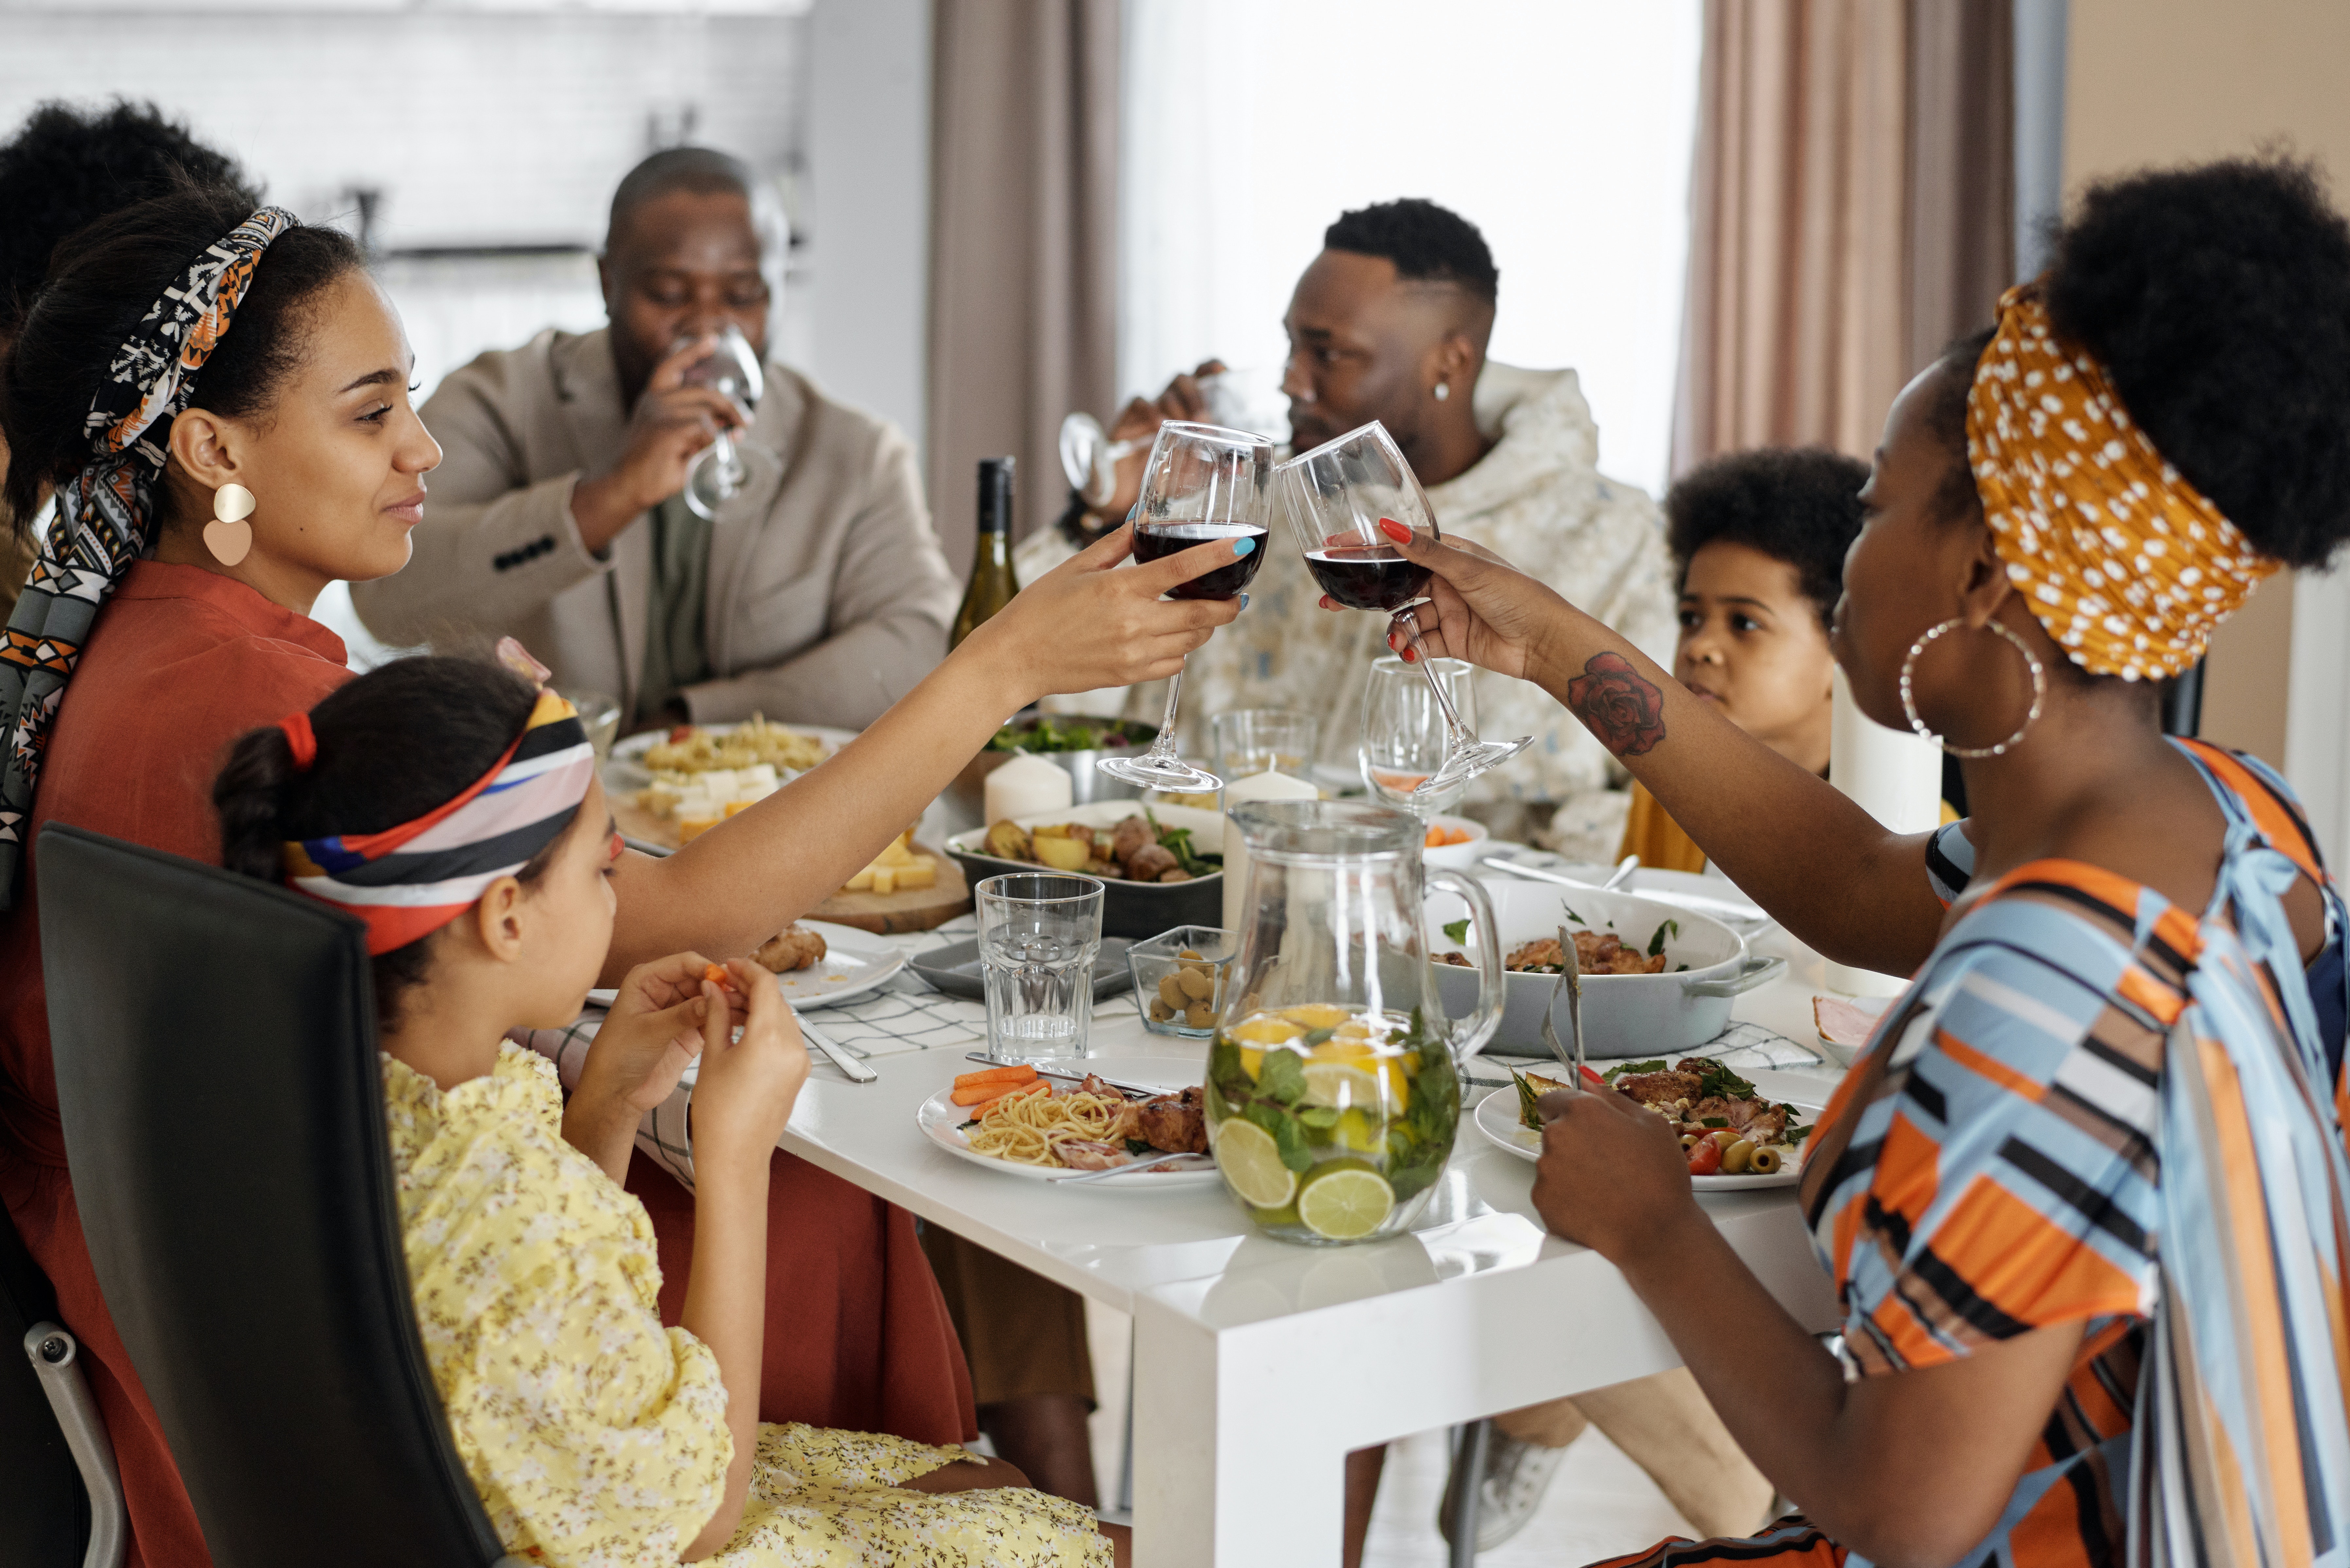 large family eating at the dinner table cheering and drinking wine 